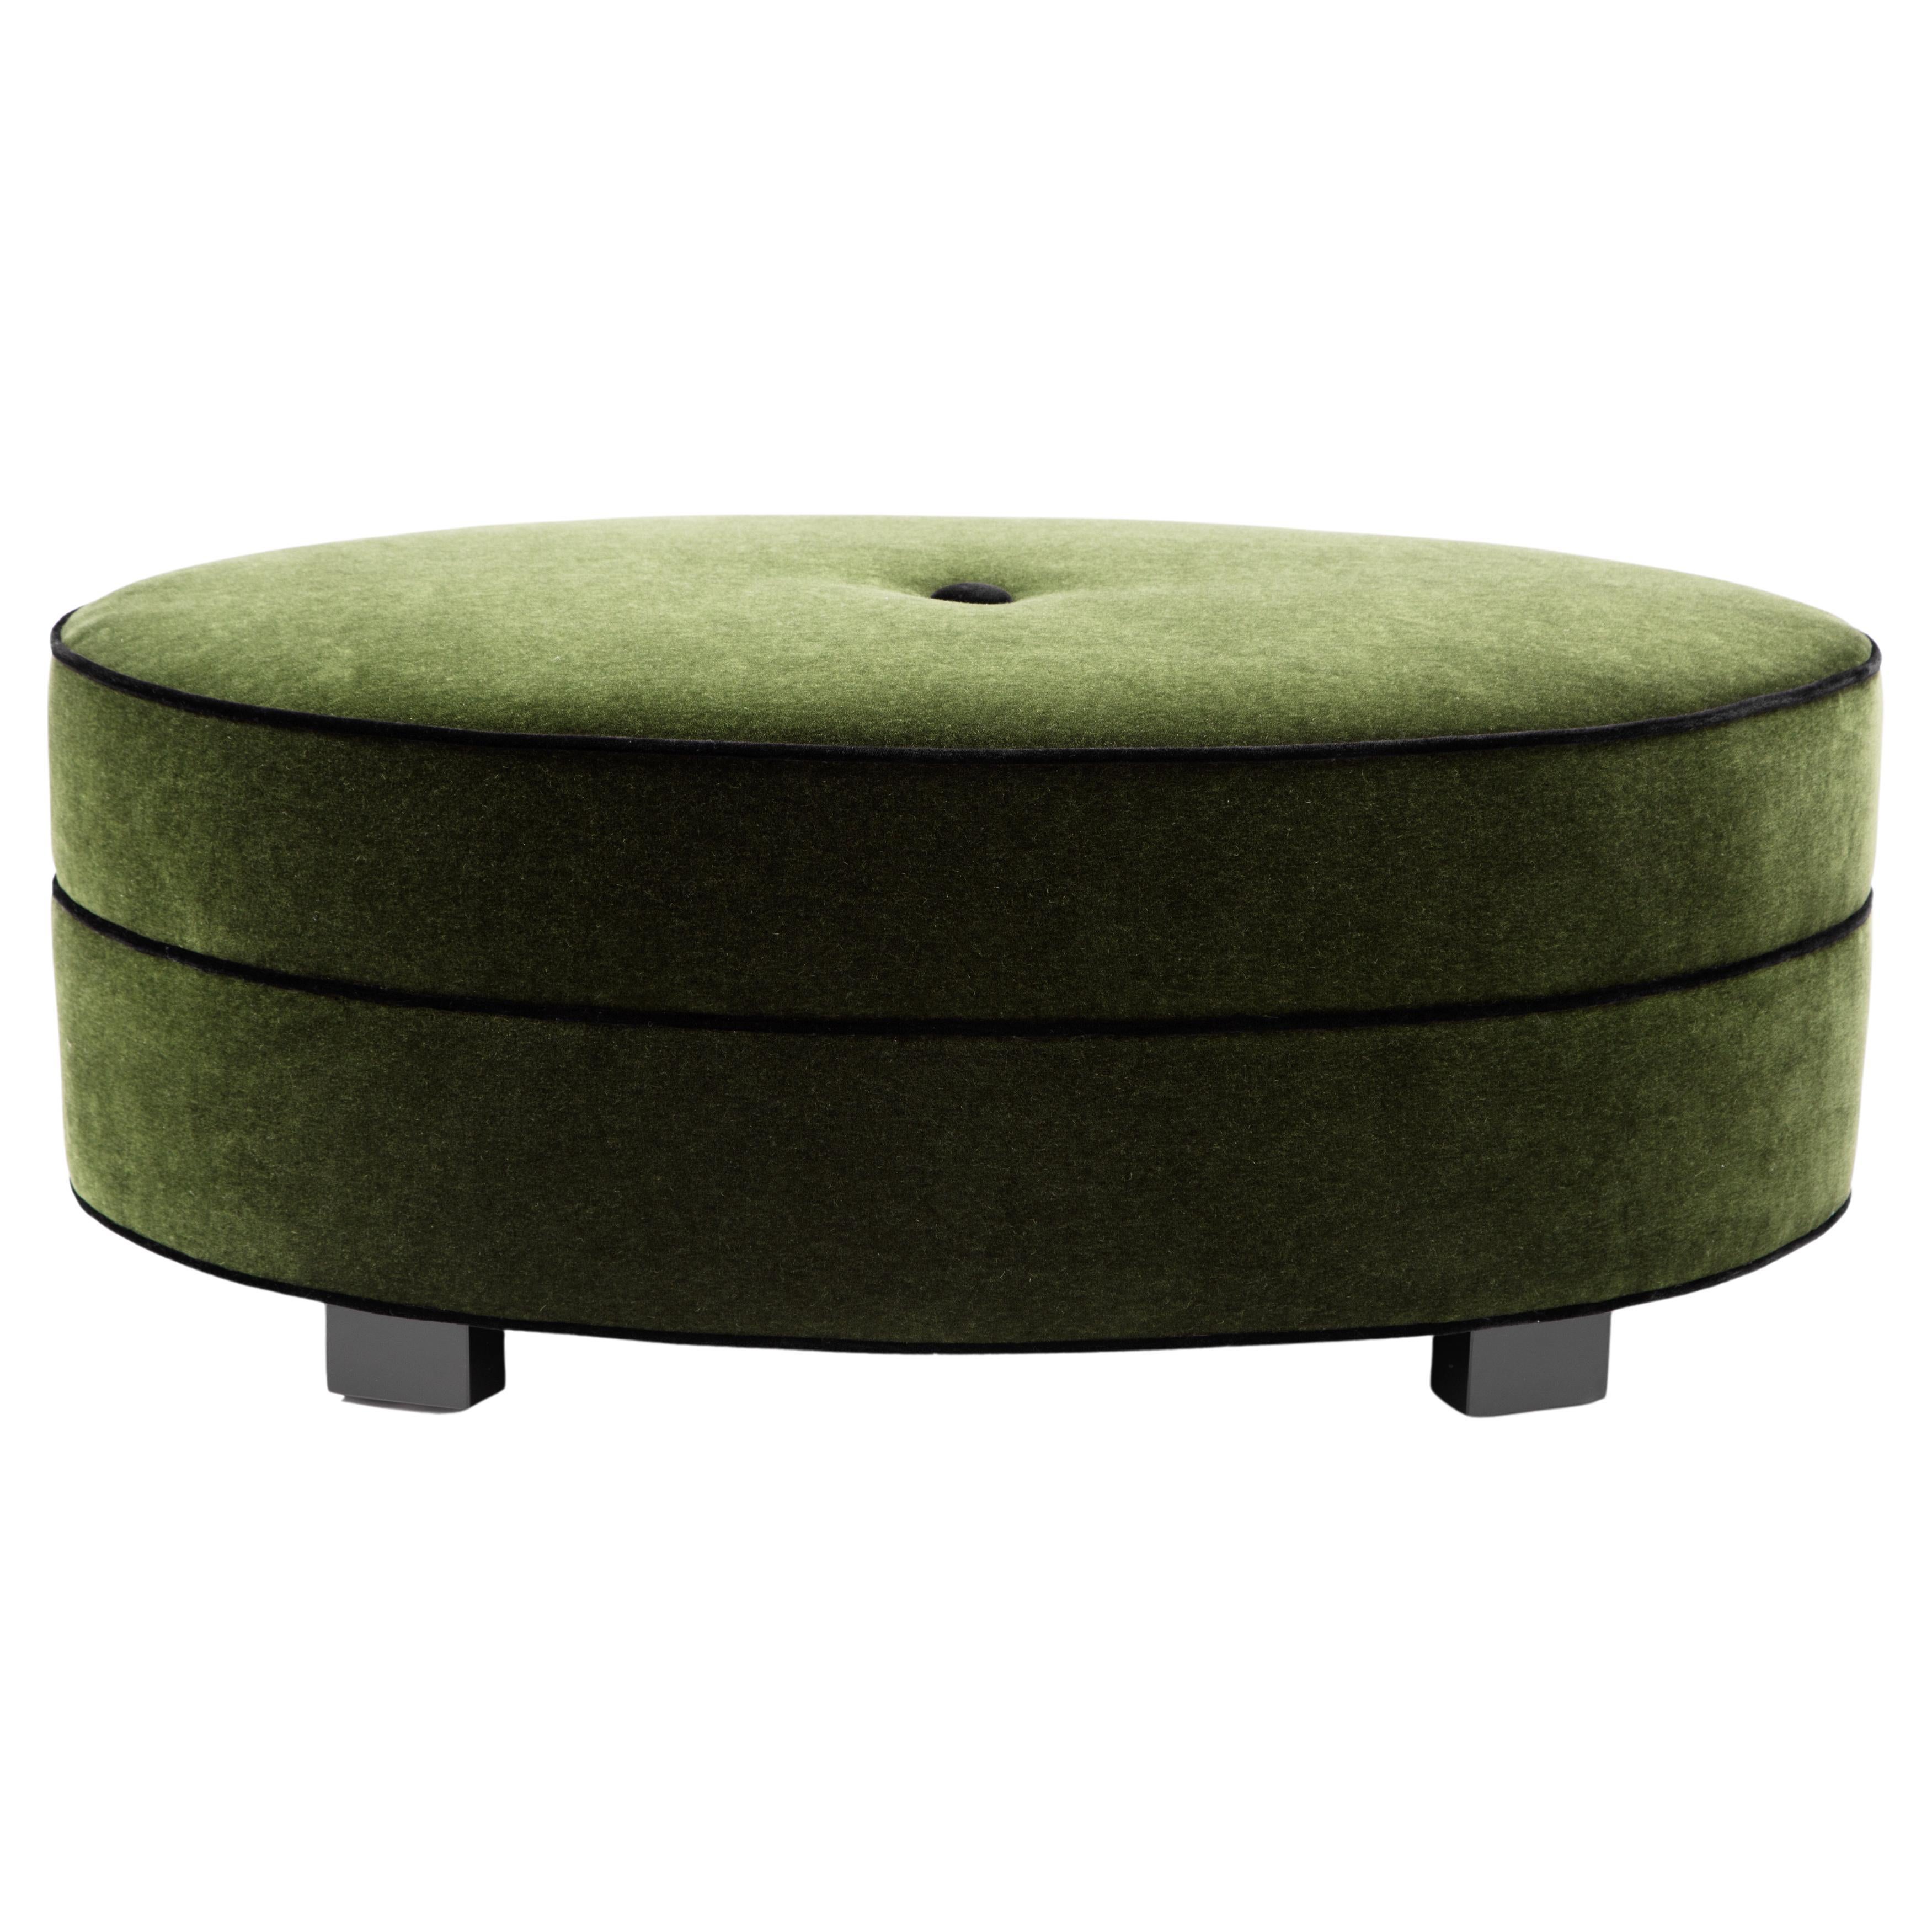 Art Deco Alessandra Ottoman Handcrafted by JAMES by Jimmy DeLaurentis